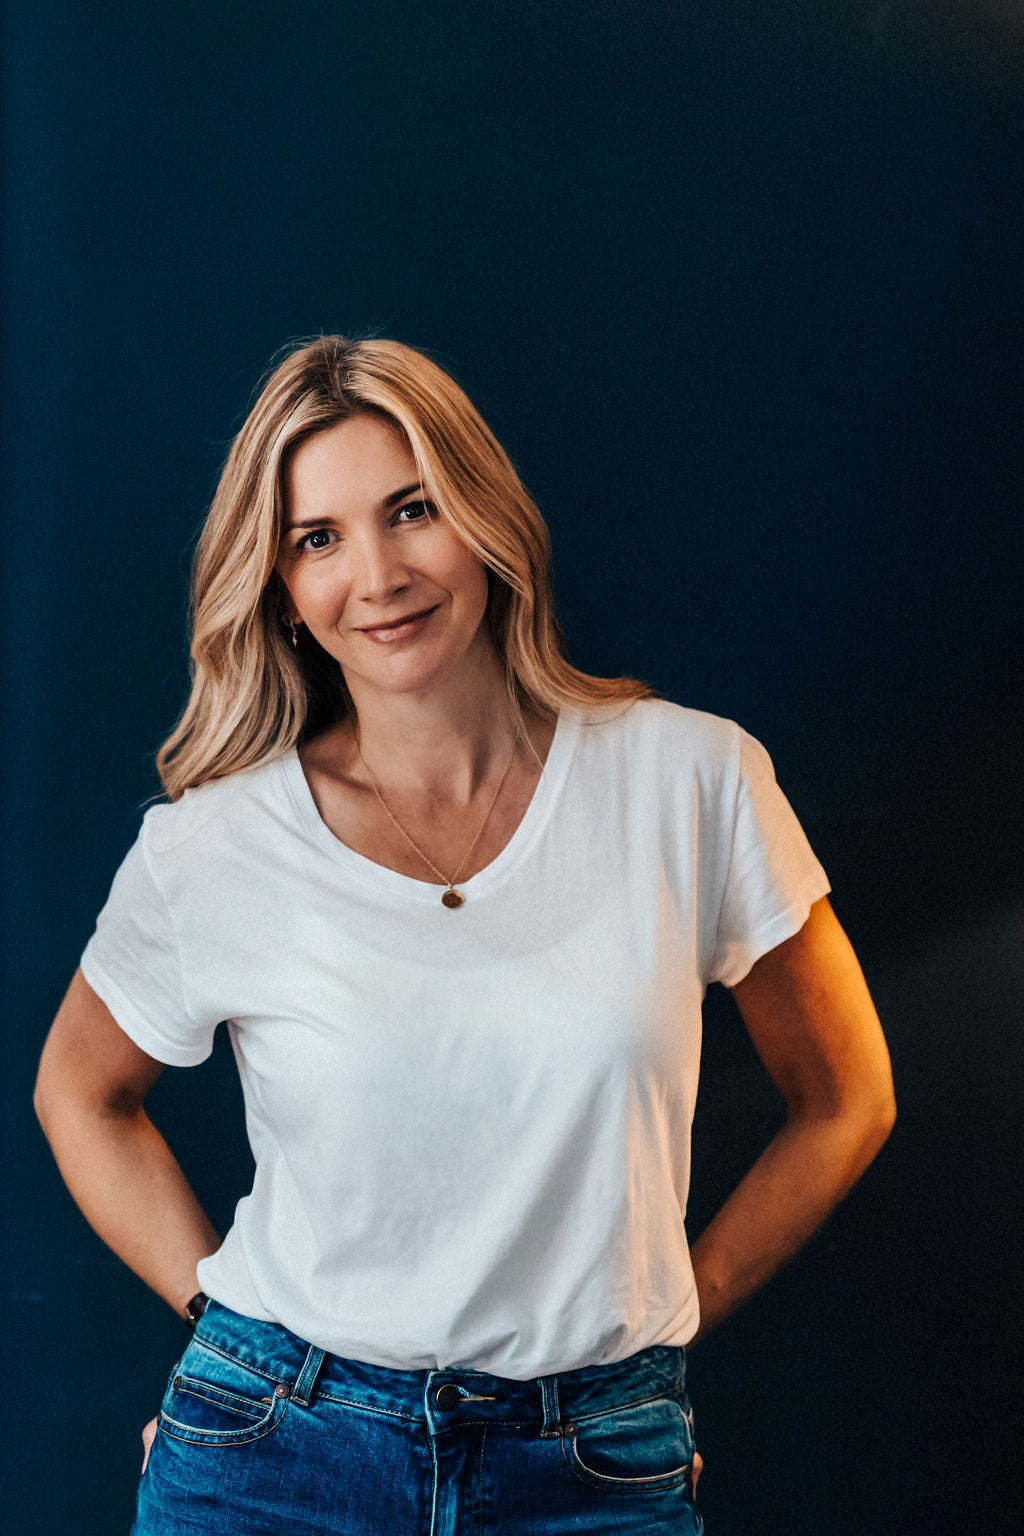 10 minutes with Lisa Faulkner